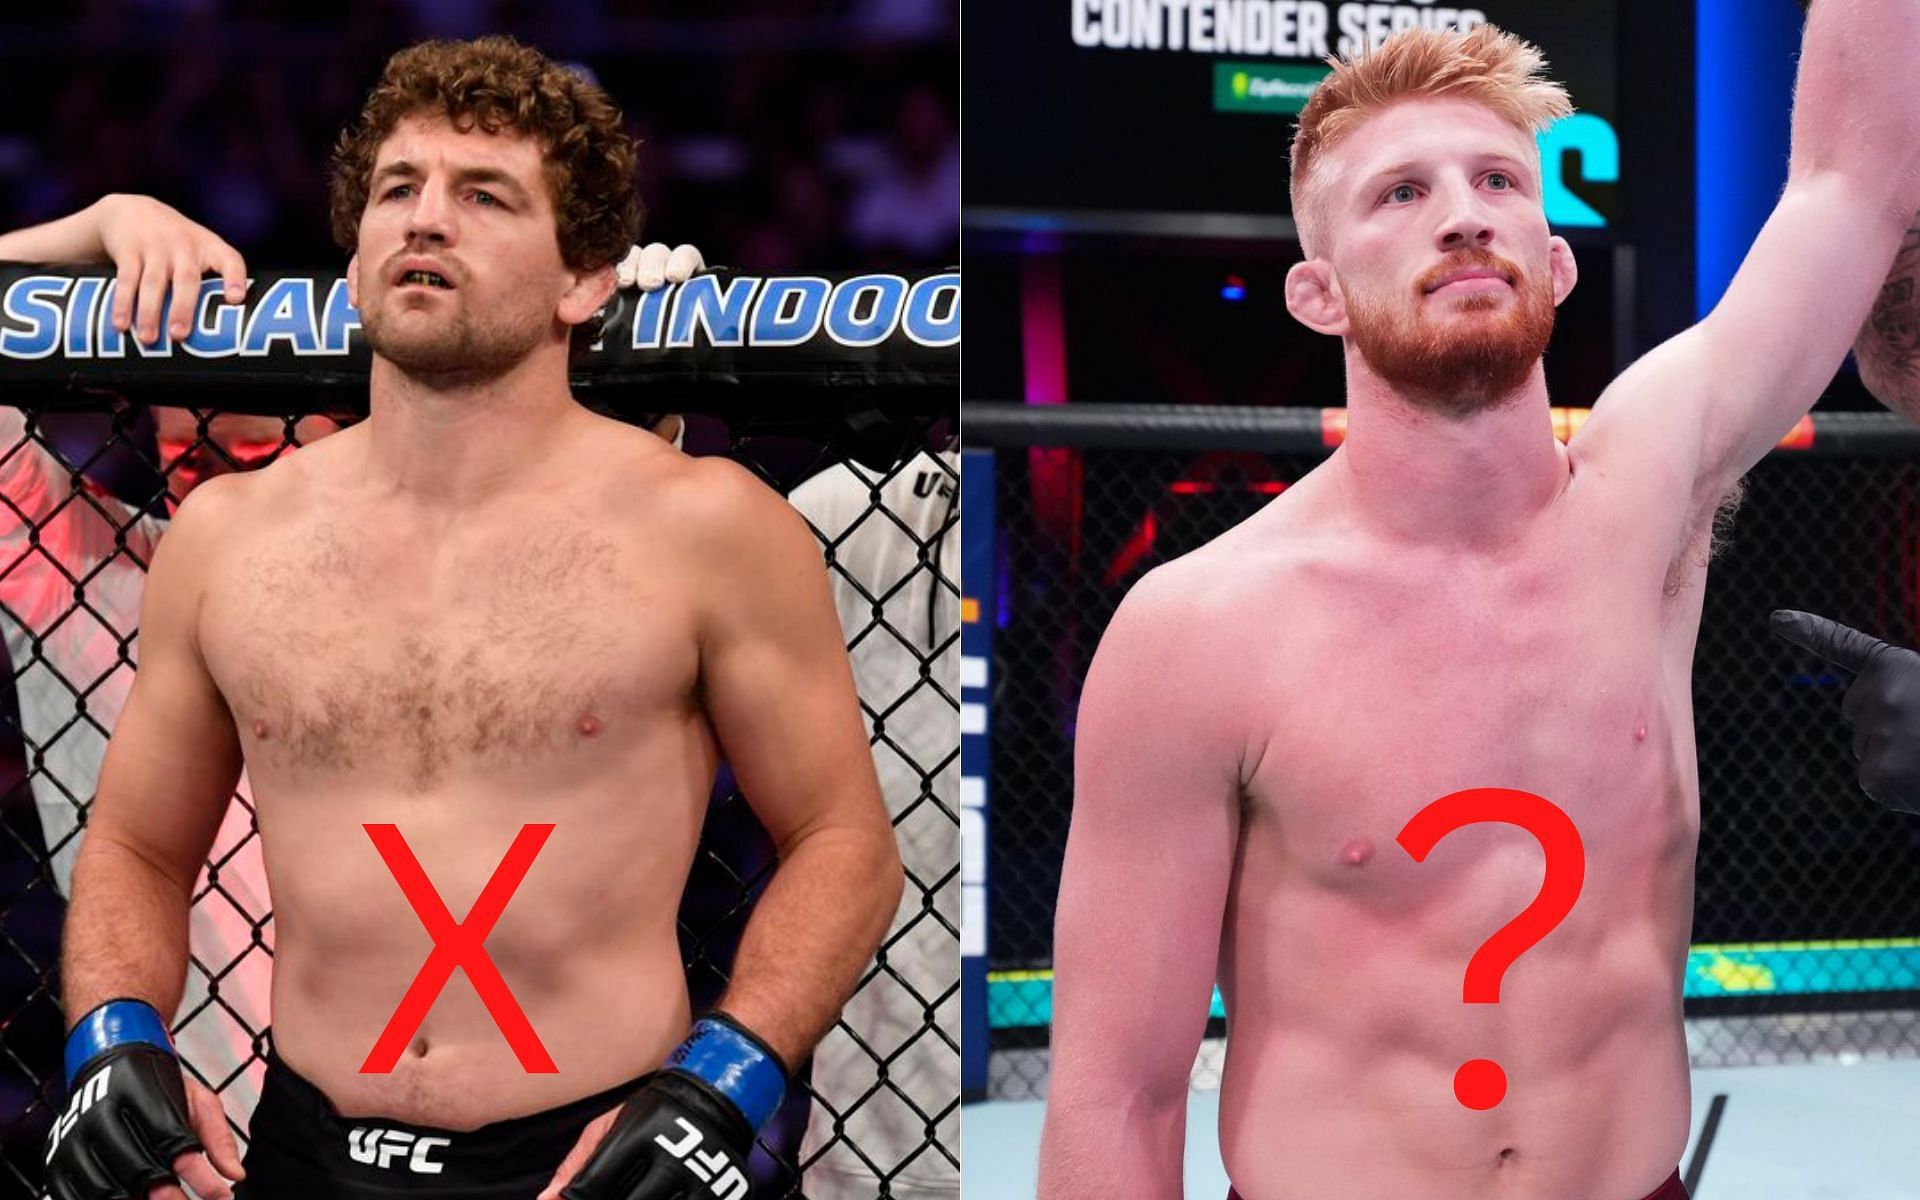 Can Bo Nickal (right) have more success in the octagon than Ben Askren (left) did?